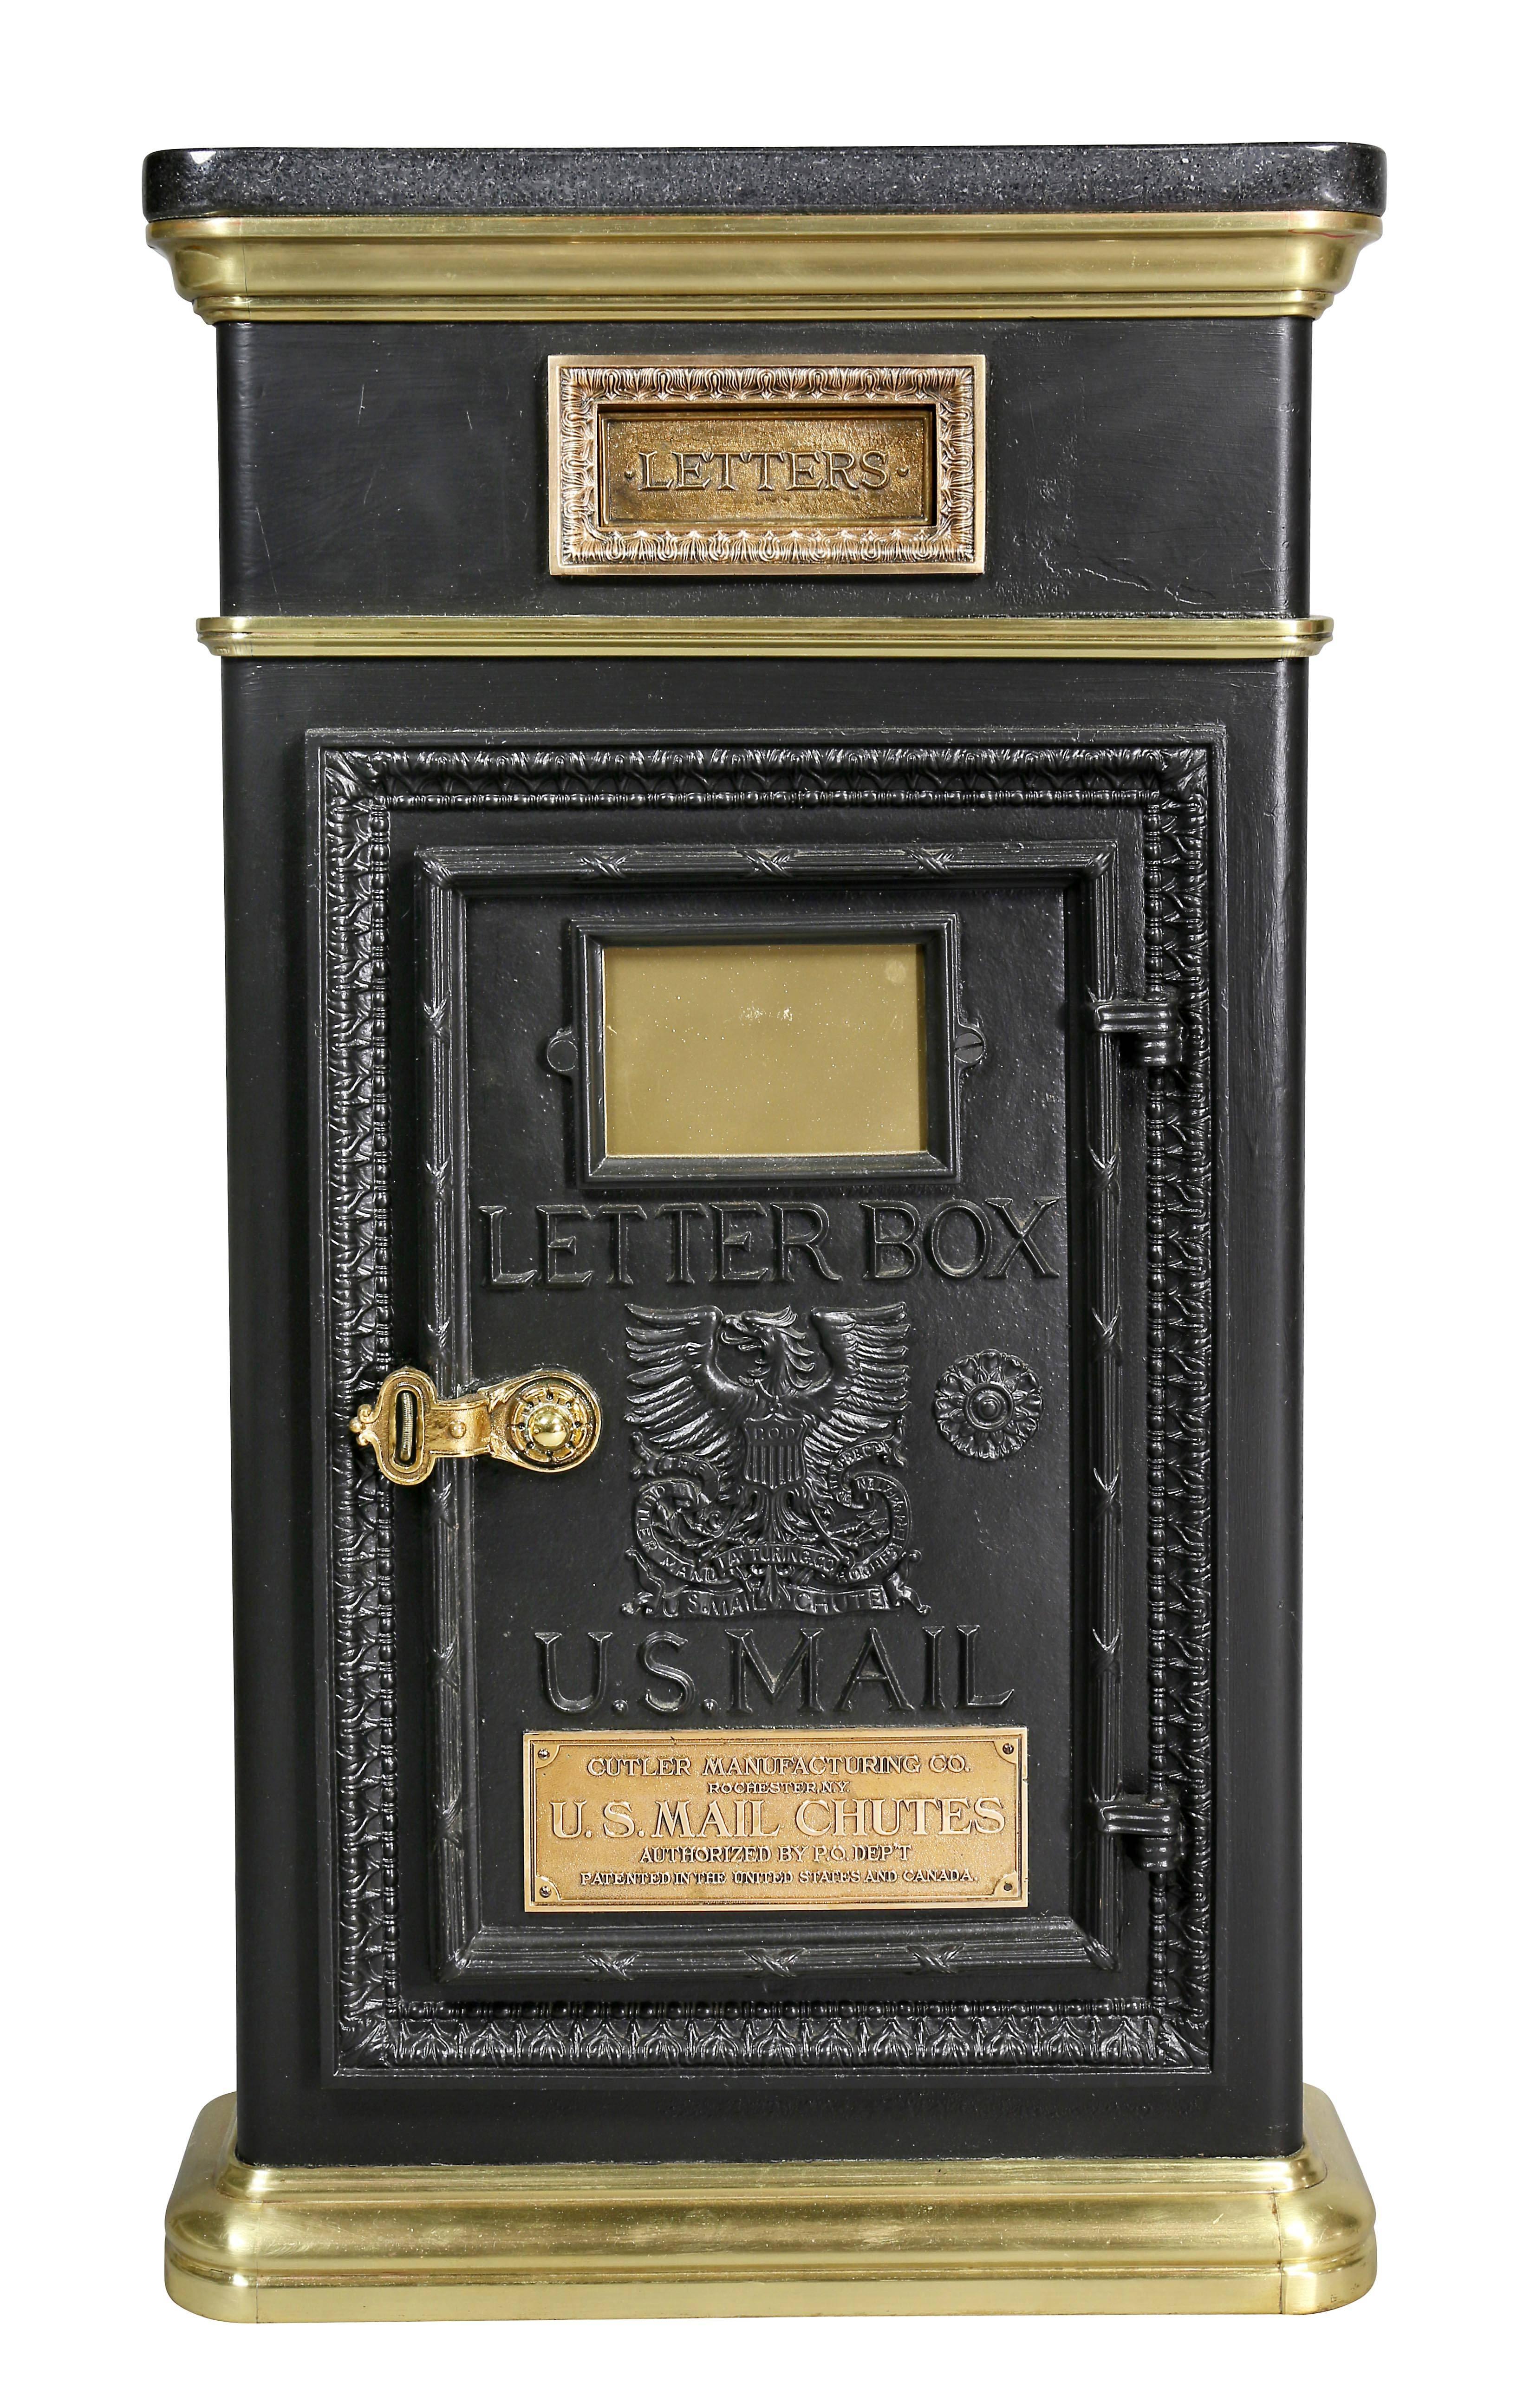 Now with a black marble-top with mail slot and door with embossed inscription.